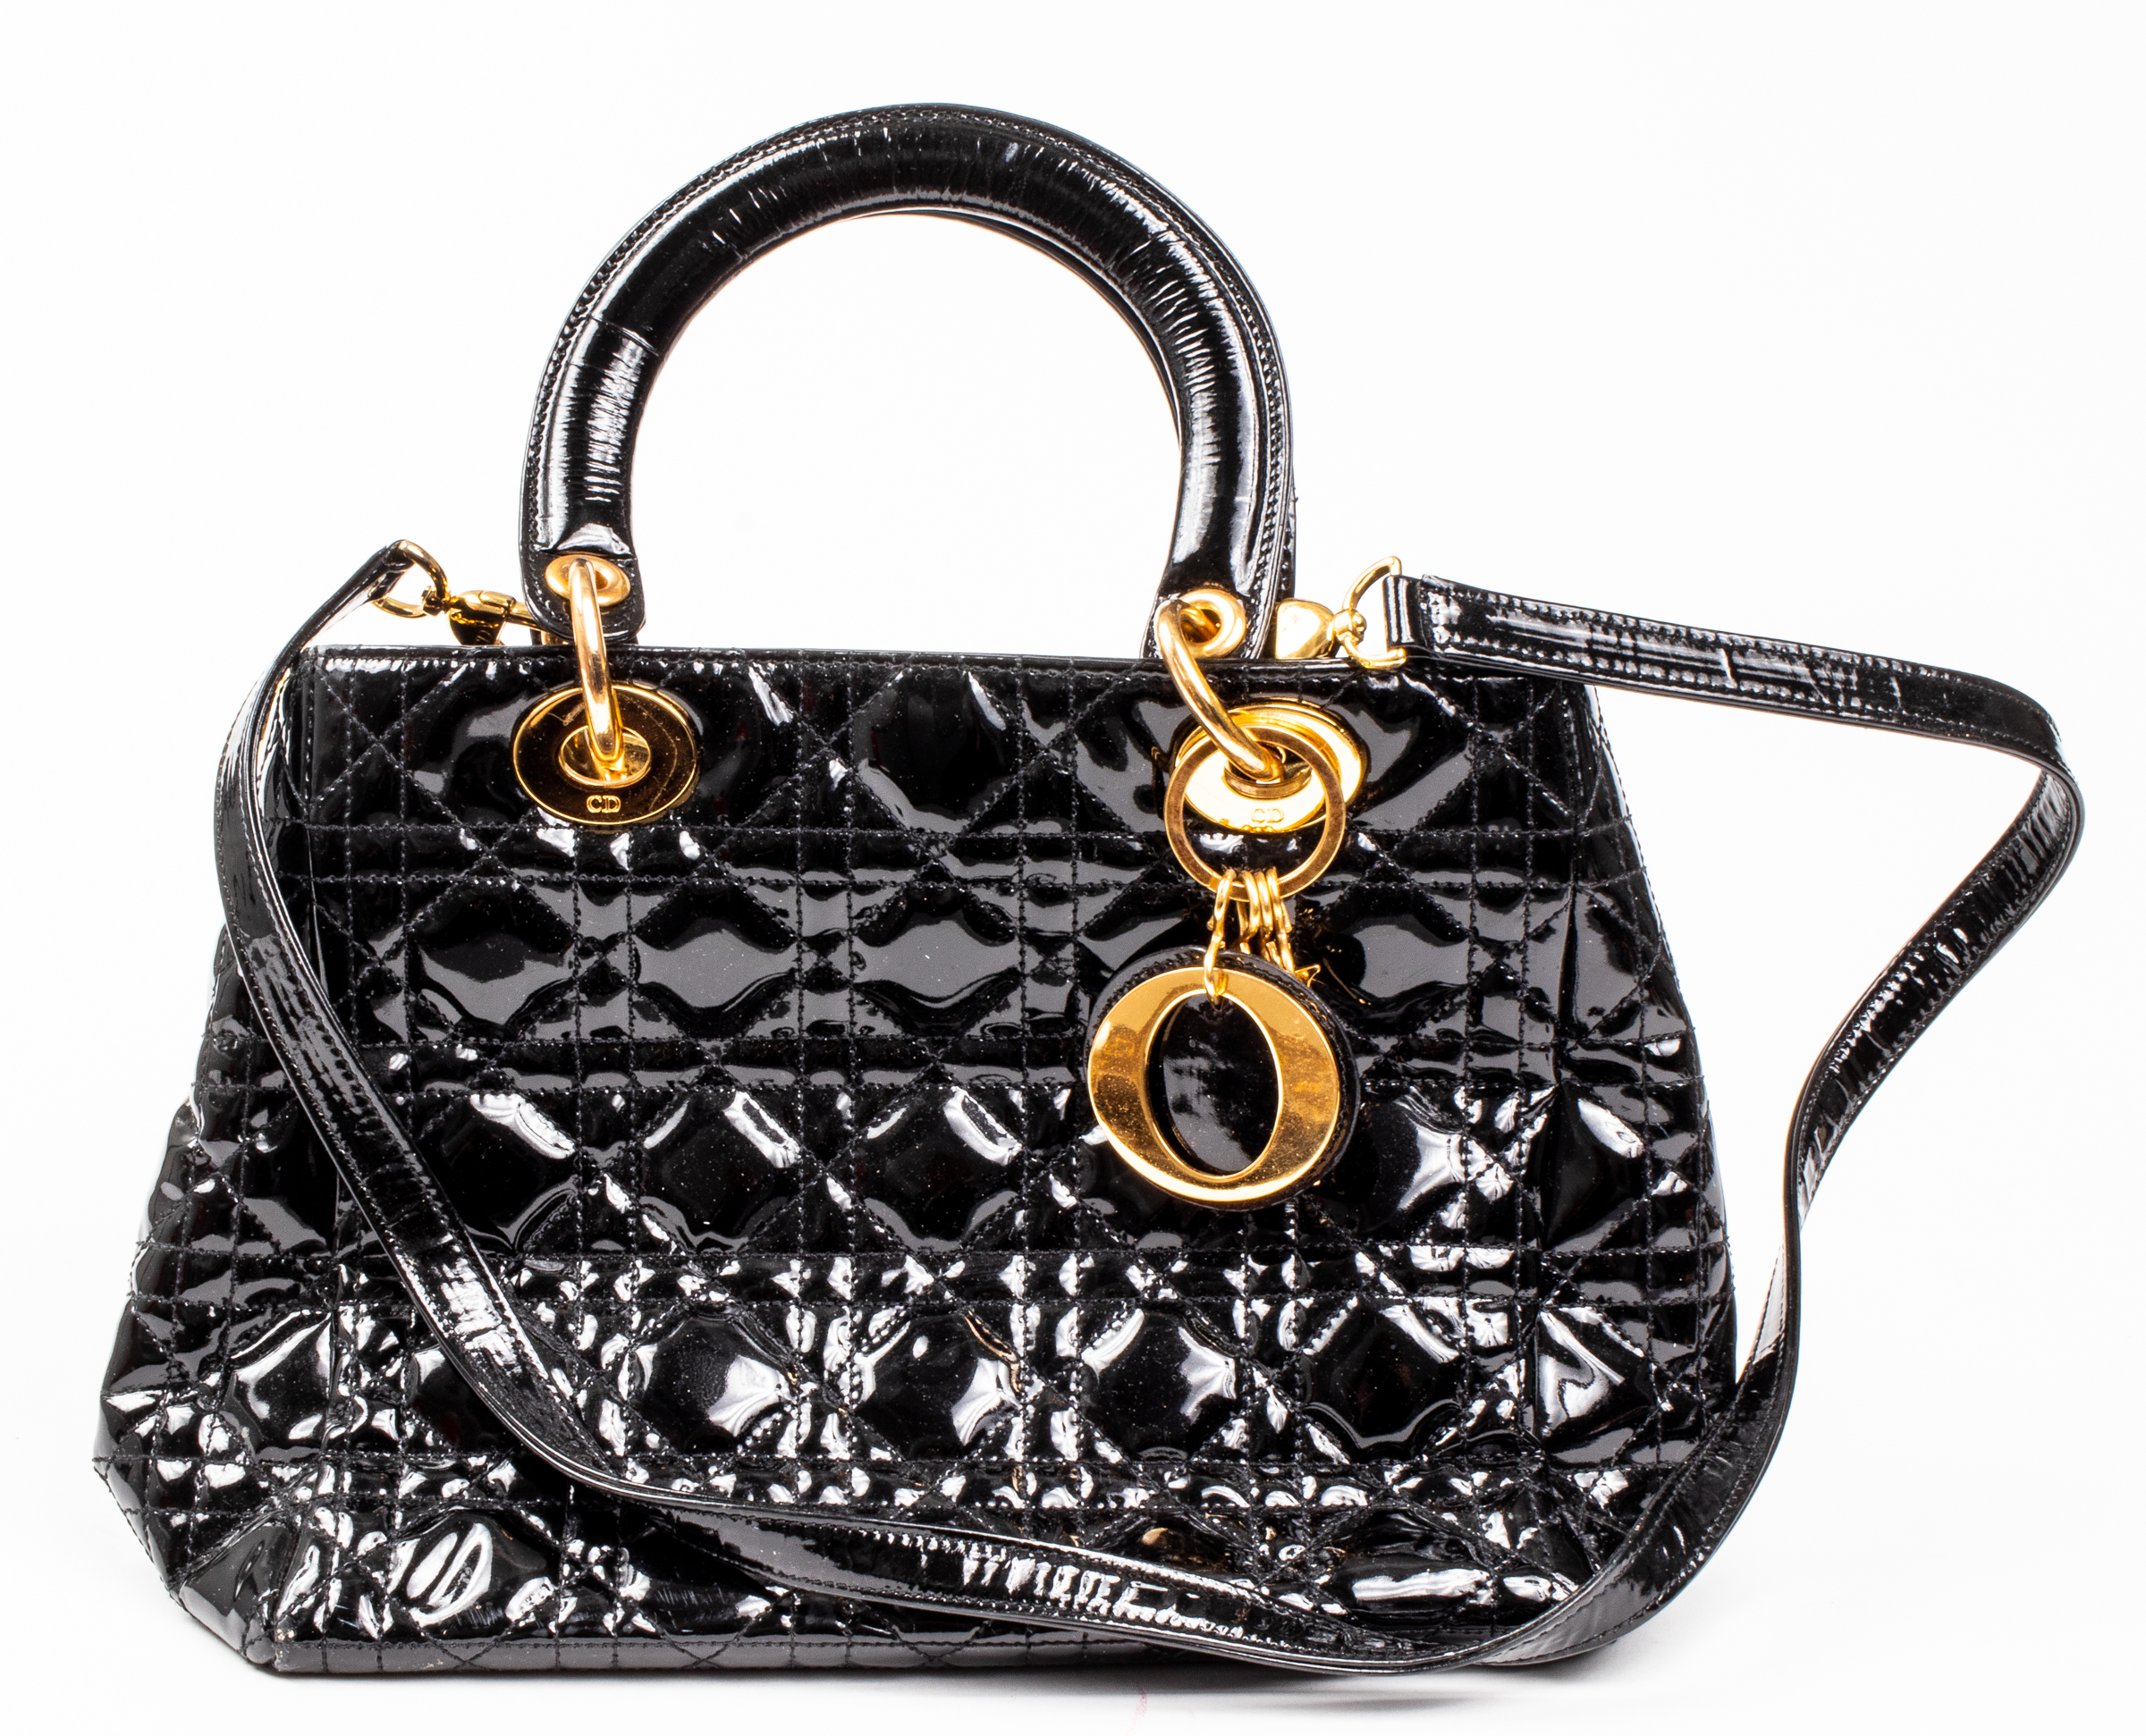 BLACK QUILTED PATENT LEATHER HANDBAG 3c3a56